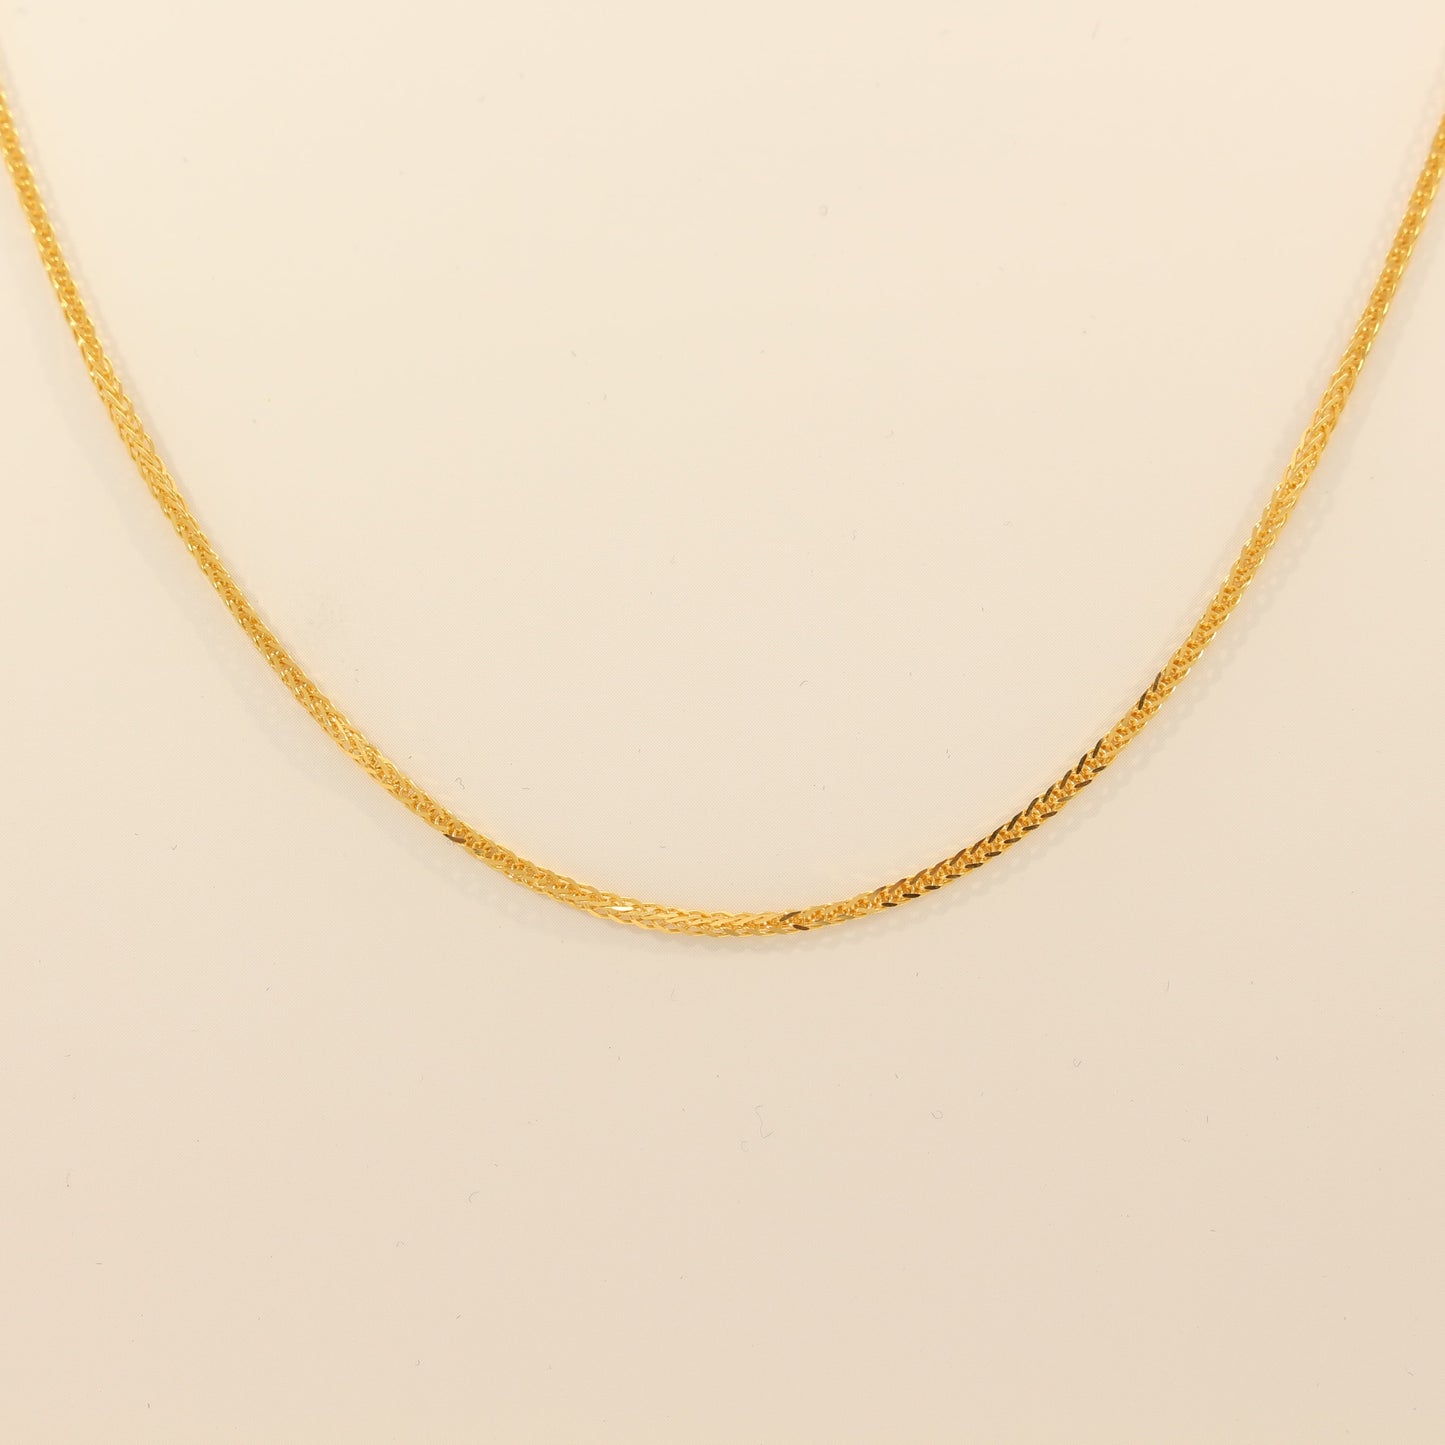 21K Gold Foxtail Chain (<2mm)